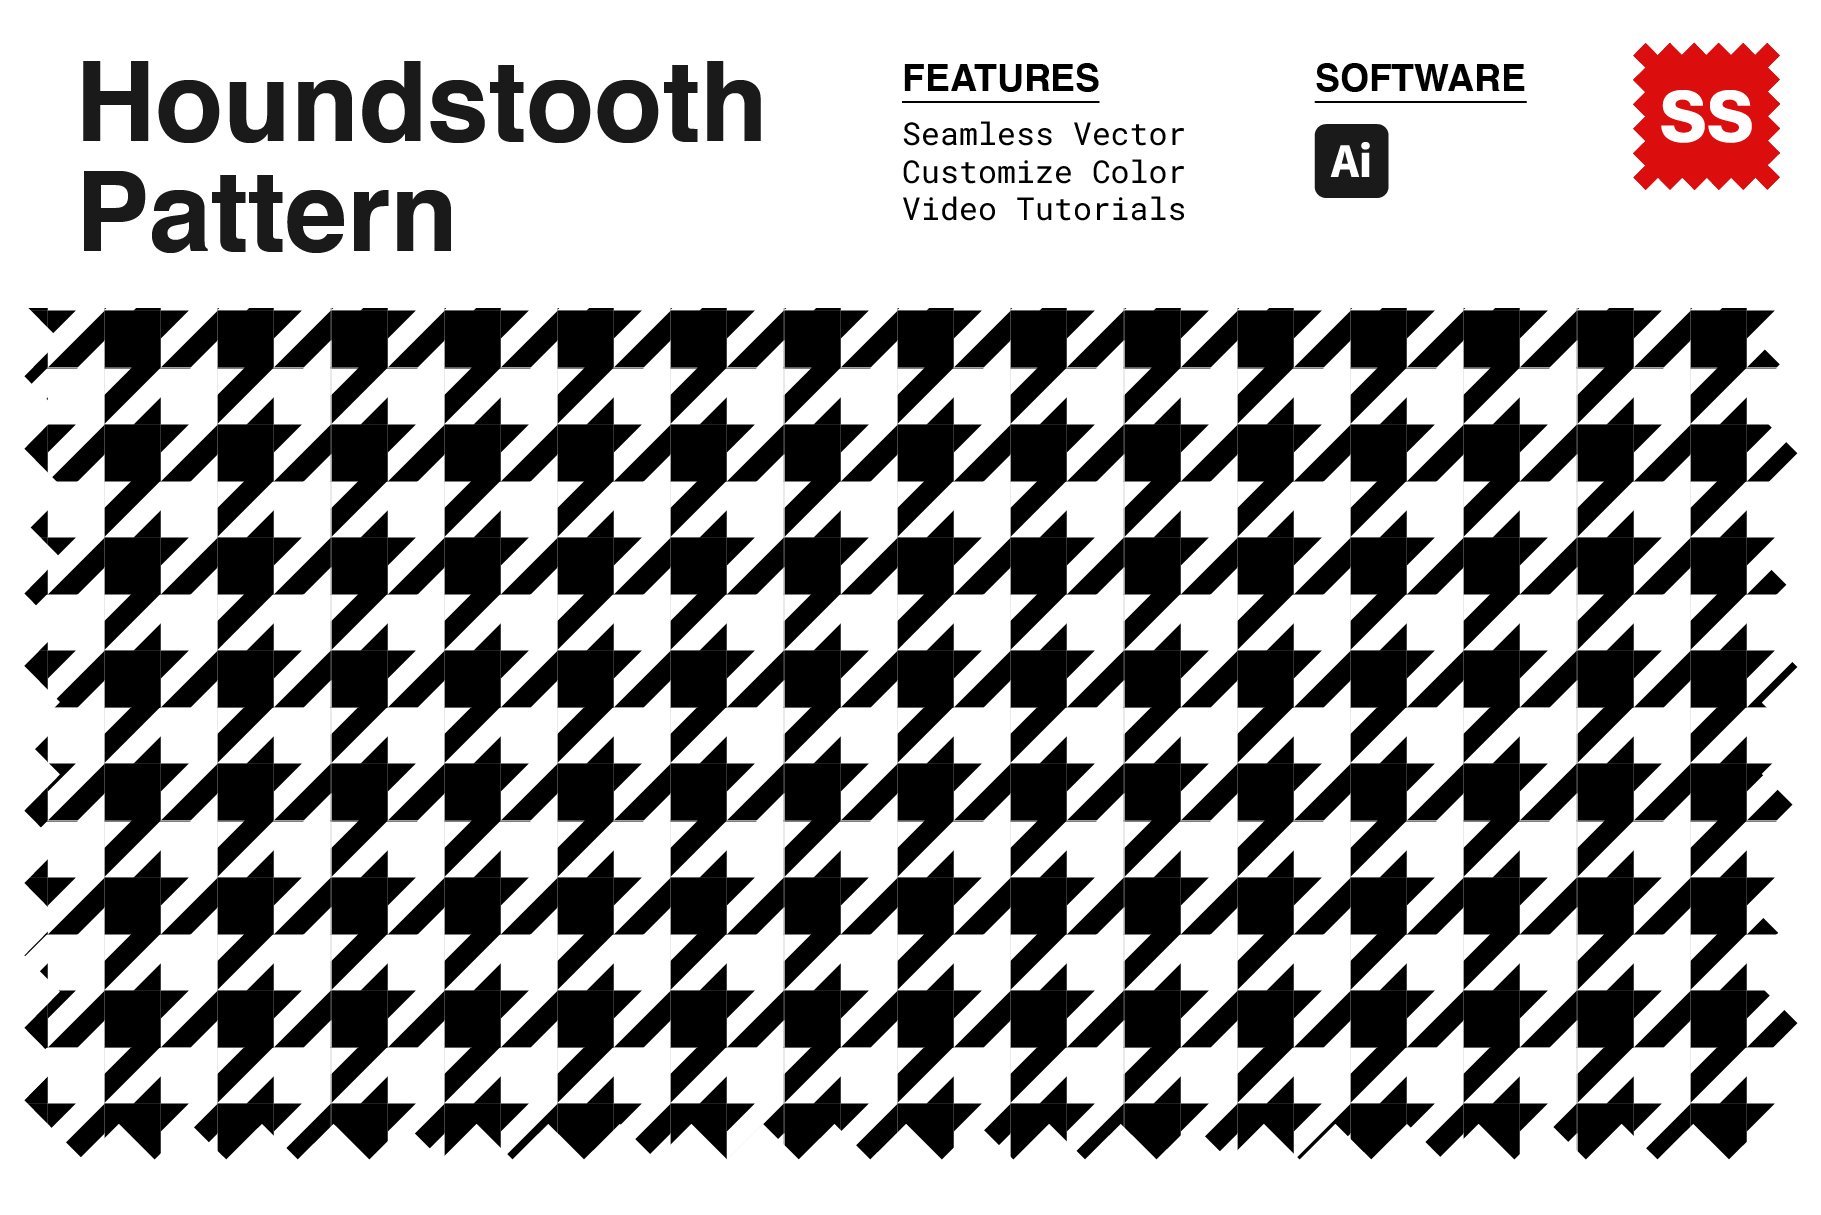 Houndstooth Pattern cover image.